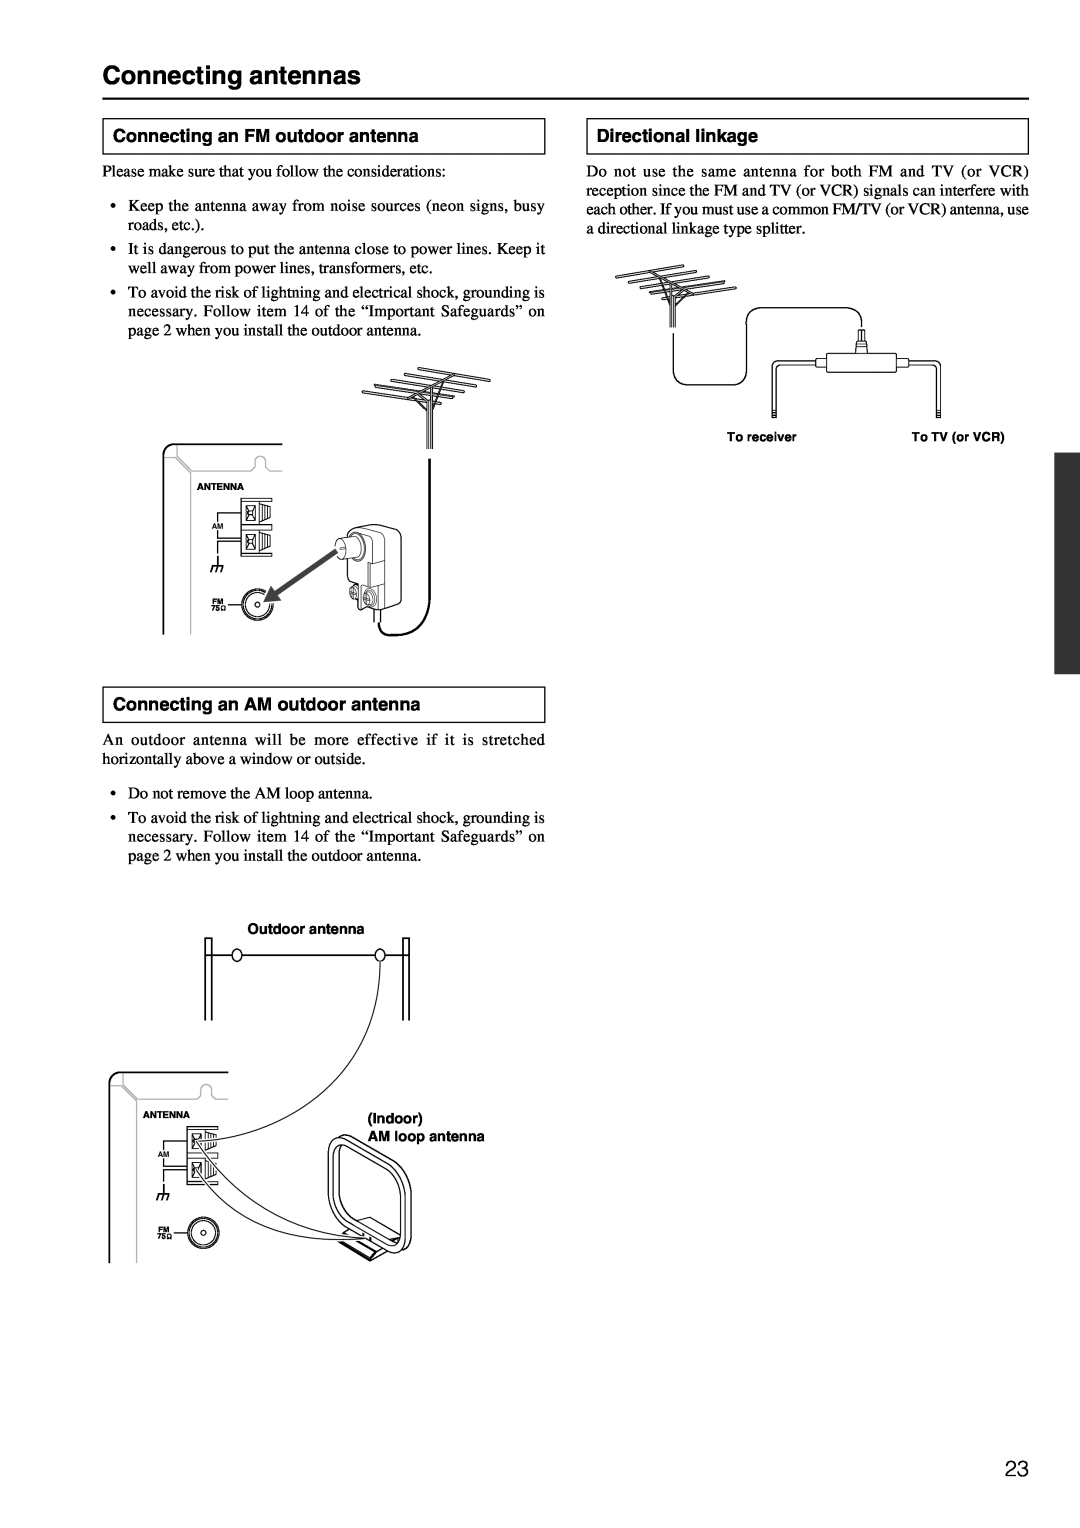 Integra DTR-6.2 instruction manual Connecting antennas, Connecting an FM outdoor antenna, Directional linkage 